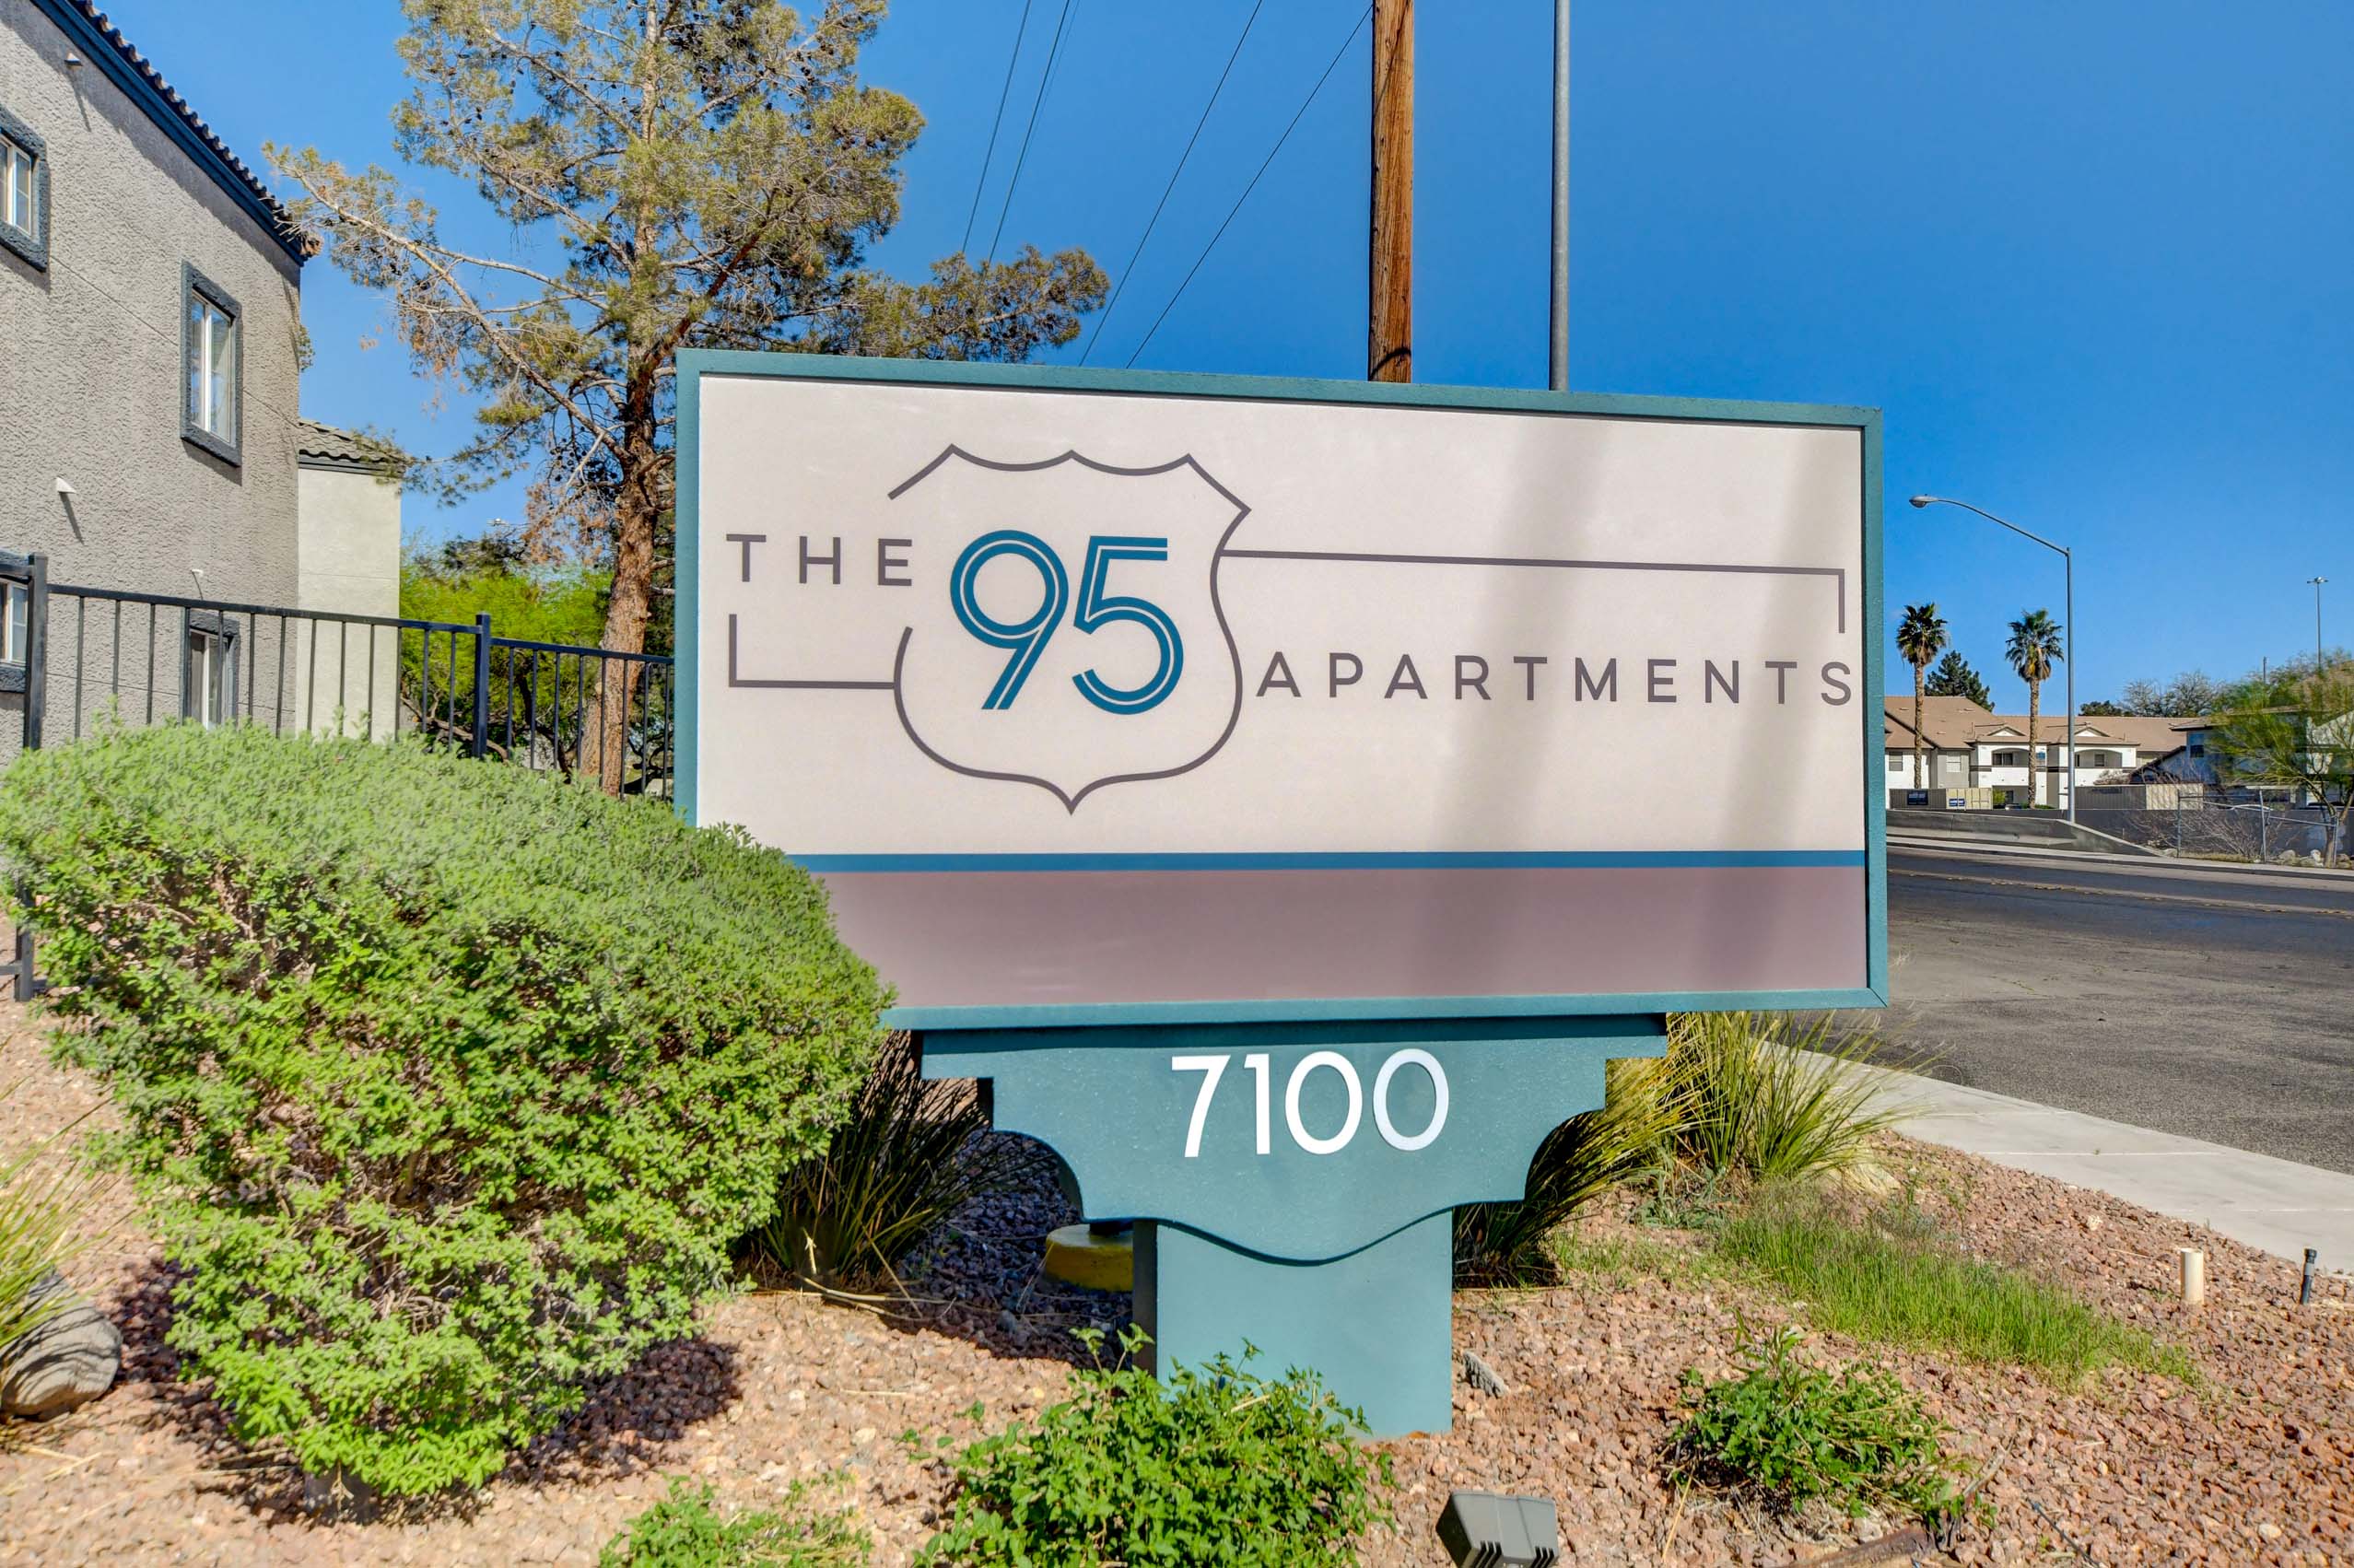 The 95 Apartments entrance sign